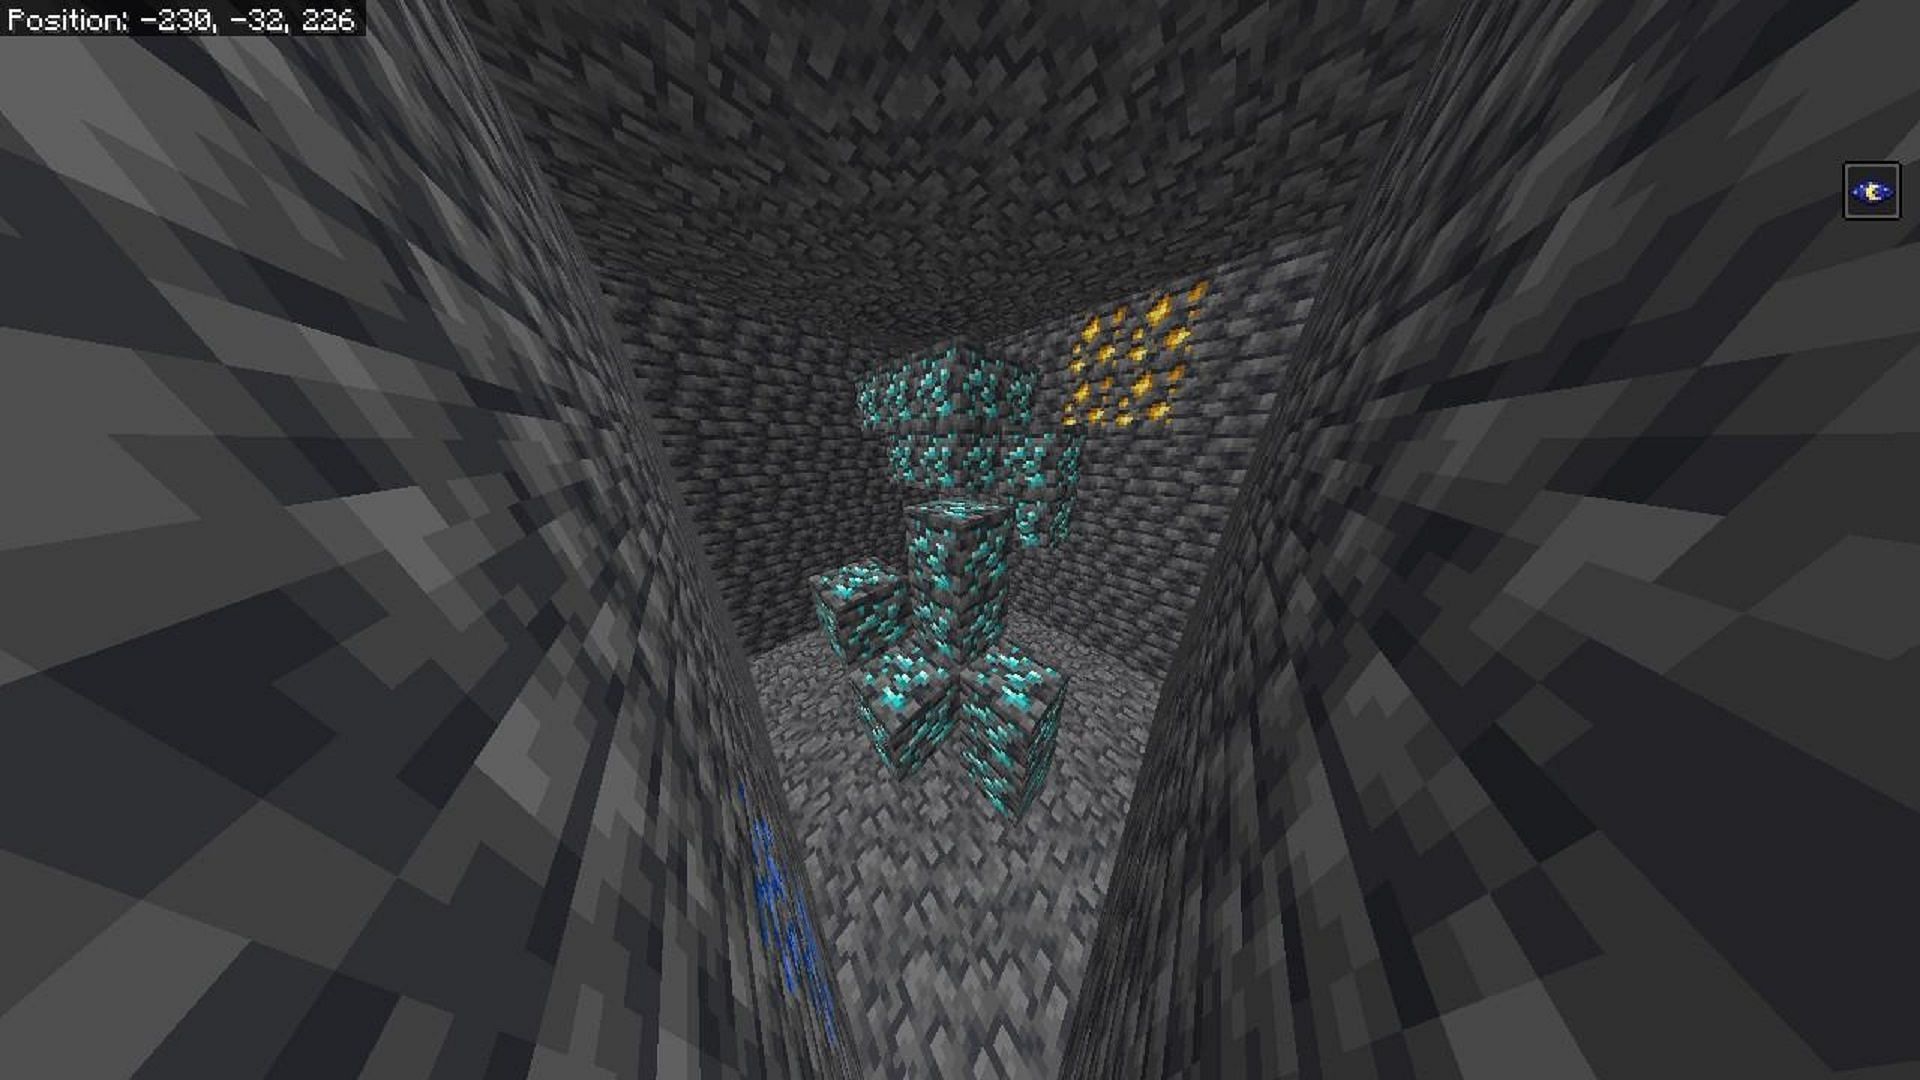 Minecraft fans may want to bring a Fortune pickaxe to this diamond vein (Image via Fragrant_Result_186/Reddit)